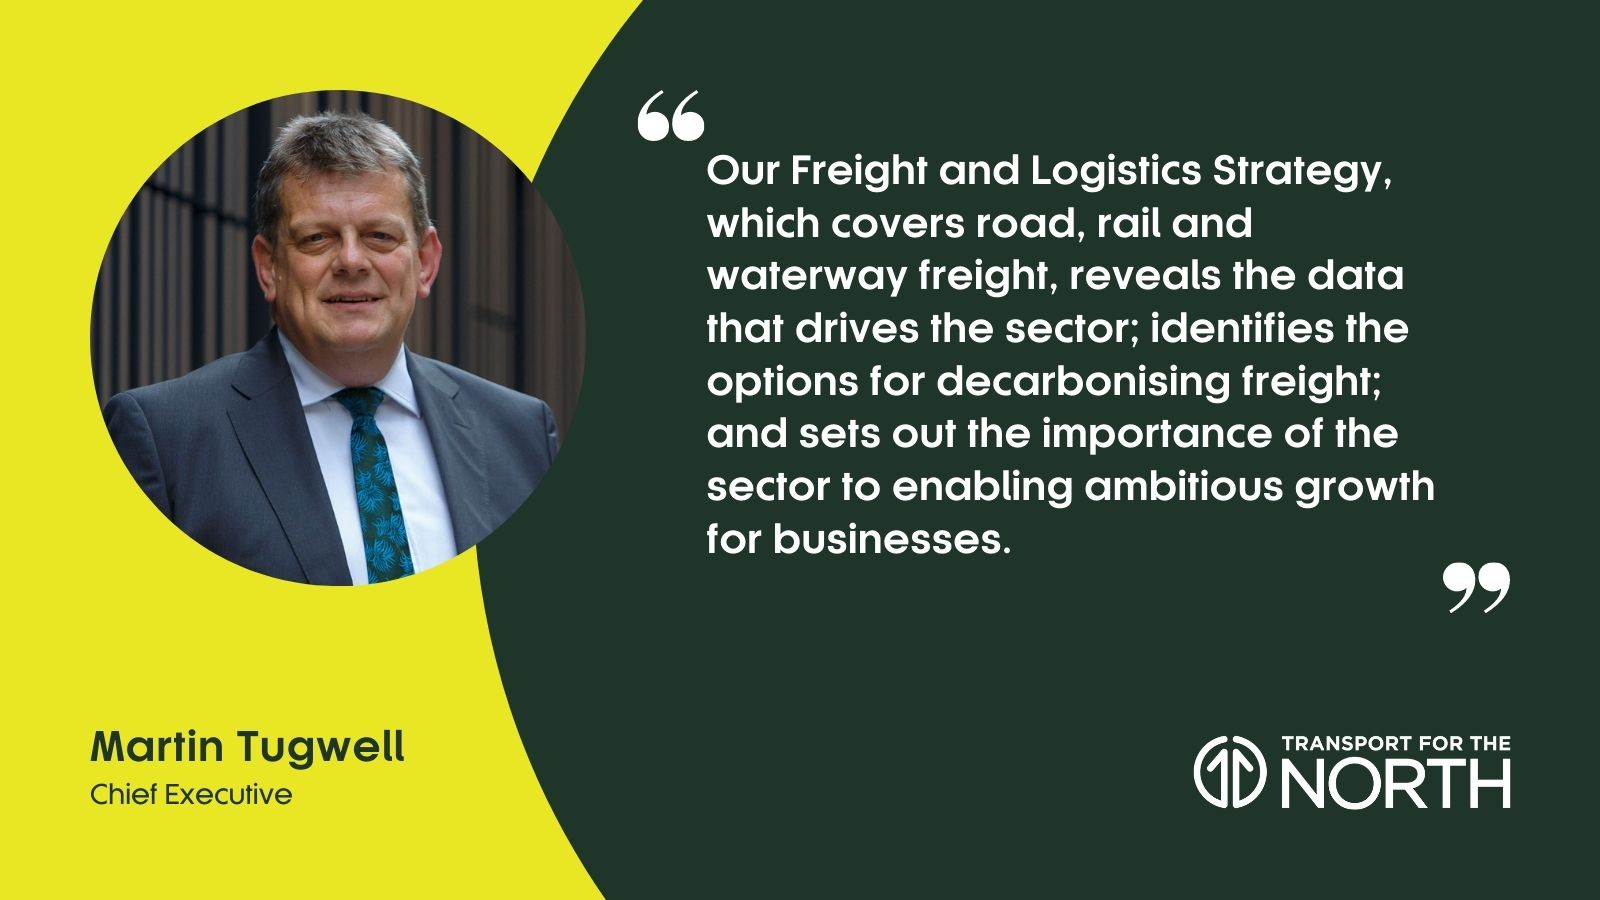 Martin Tugwell comment on Freight and Logistics Strategy